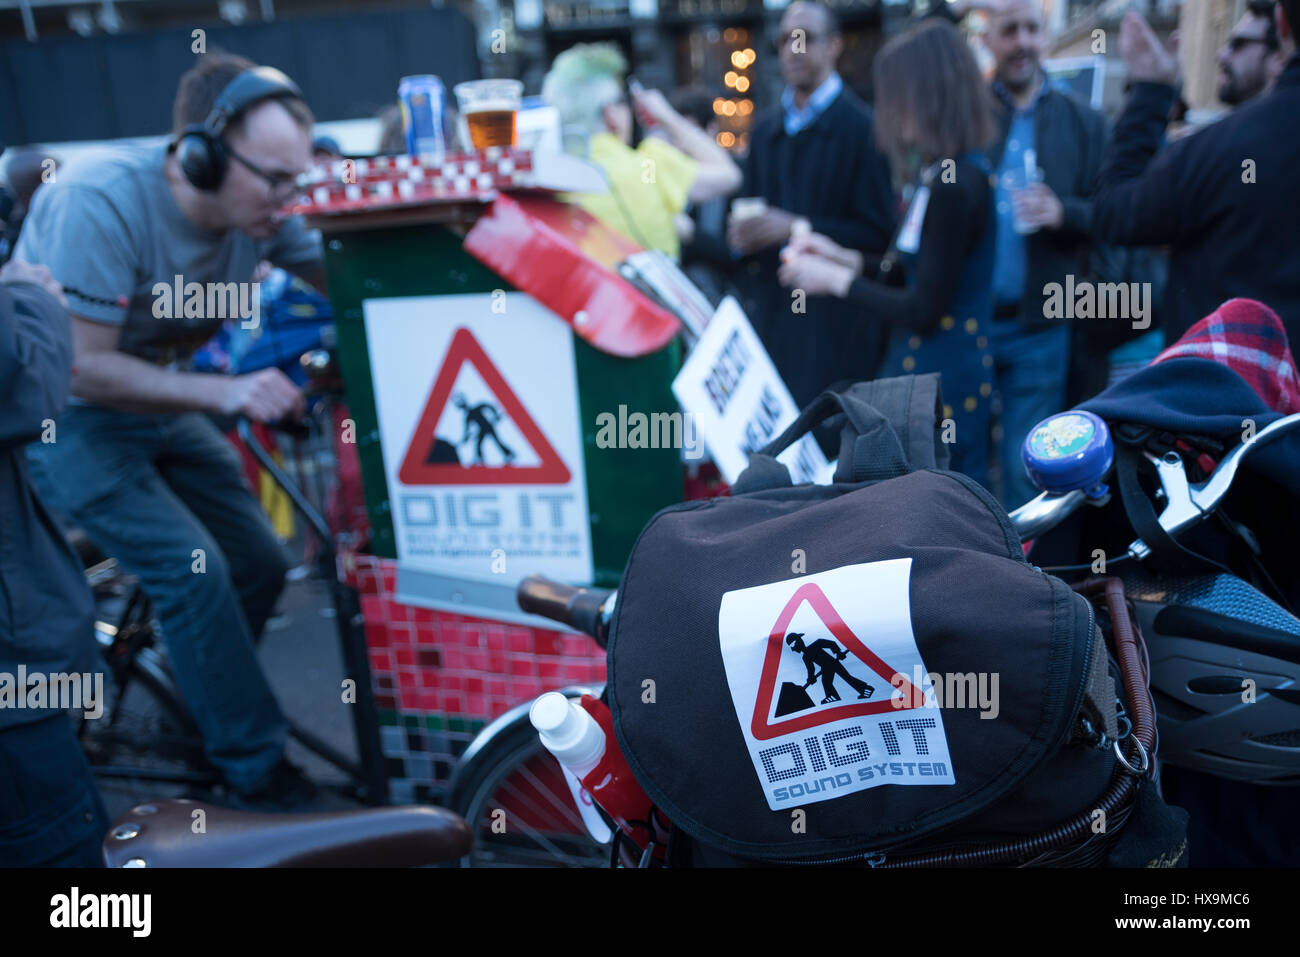 Dig it Sound system bicycle in front of the Red Lion Pub during the United for Europe March in London, UK on the 25th of March 2017. Credit: Hannah Alexa Geller/Alamy Live News Stock Photo